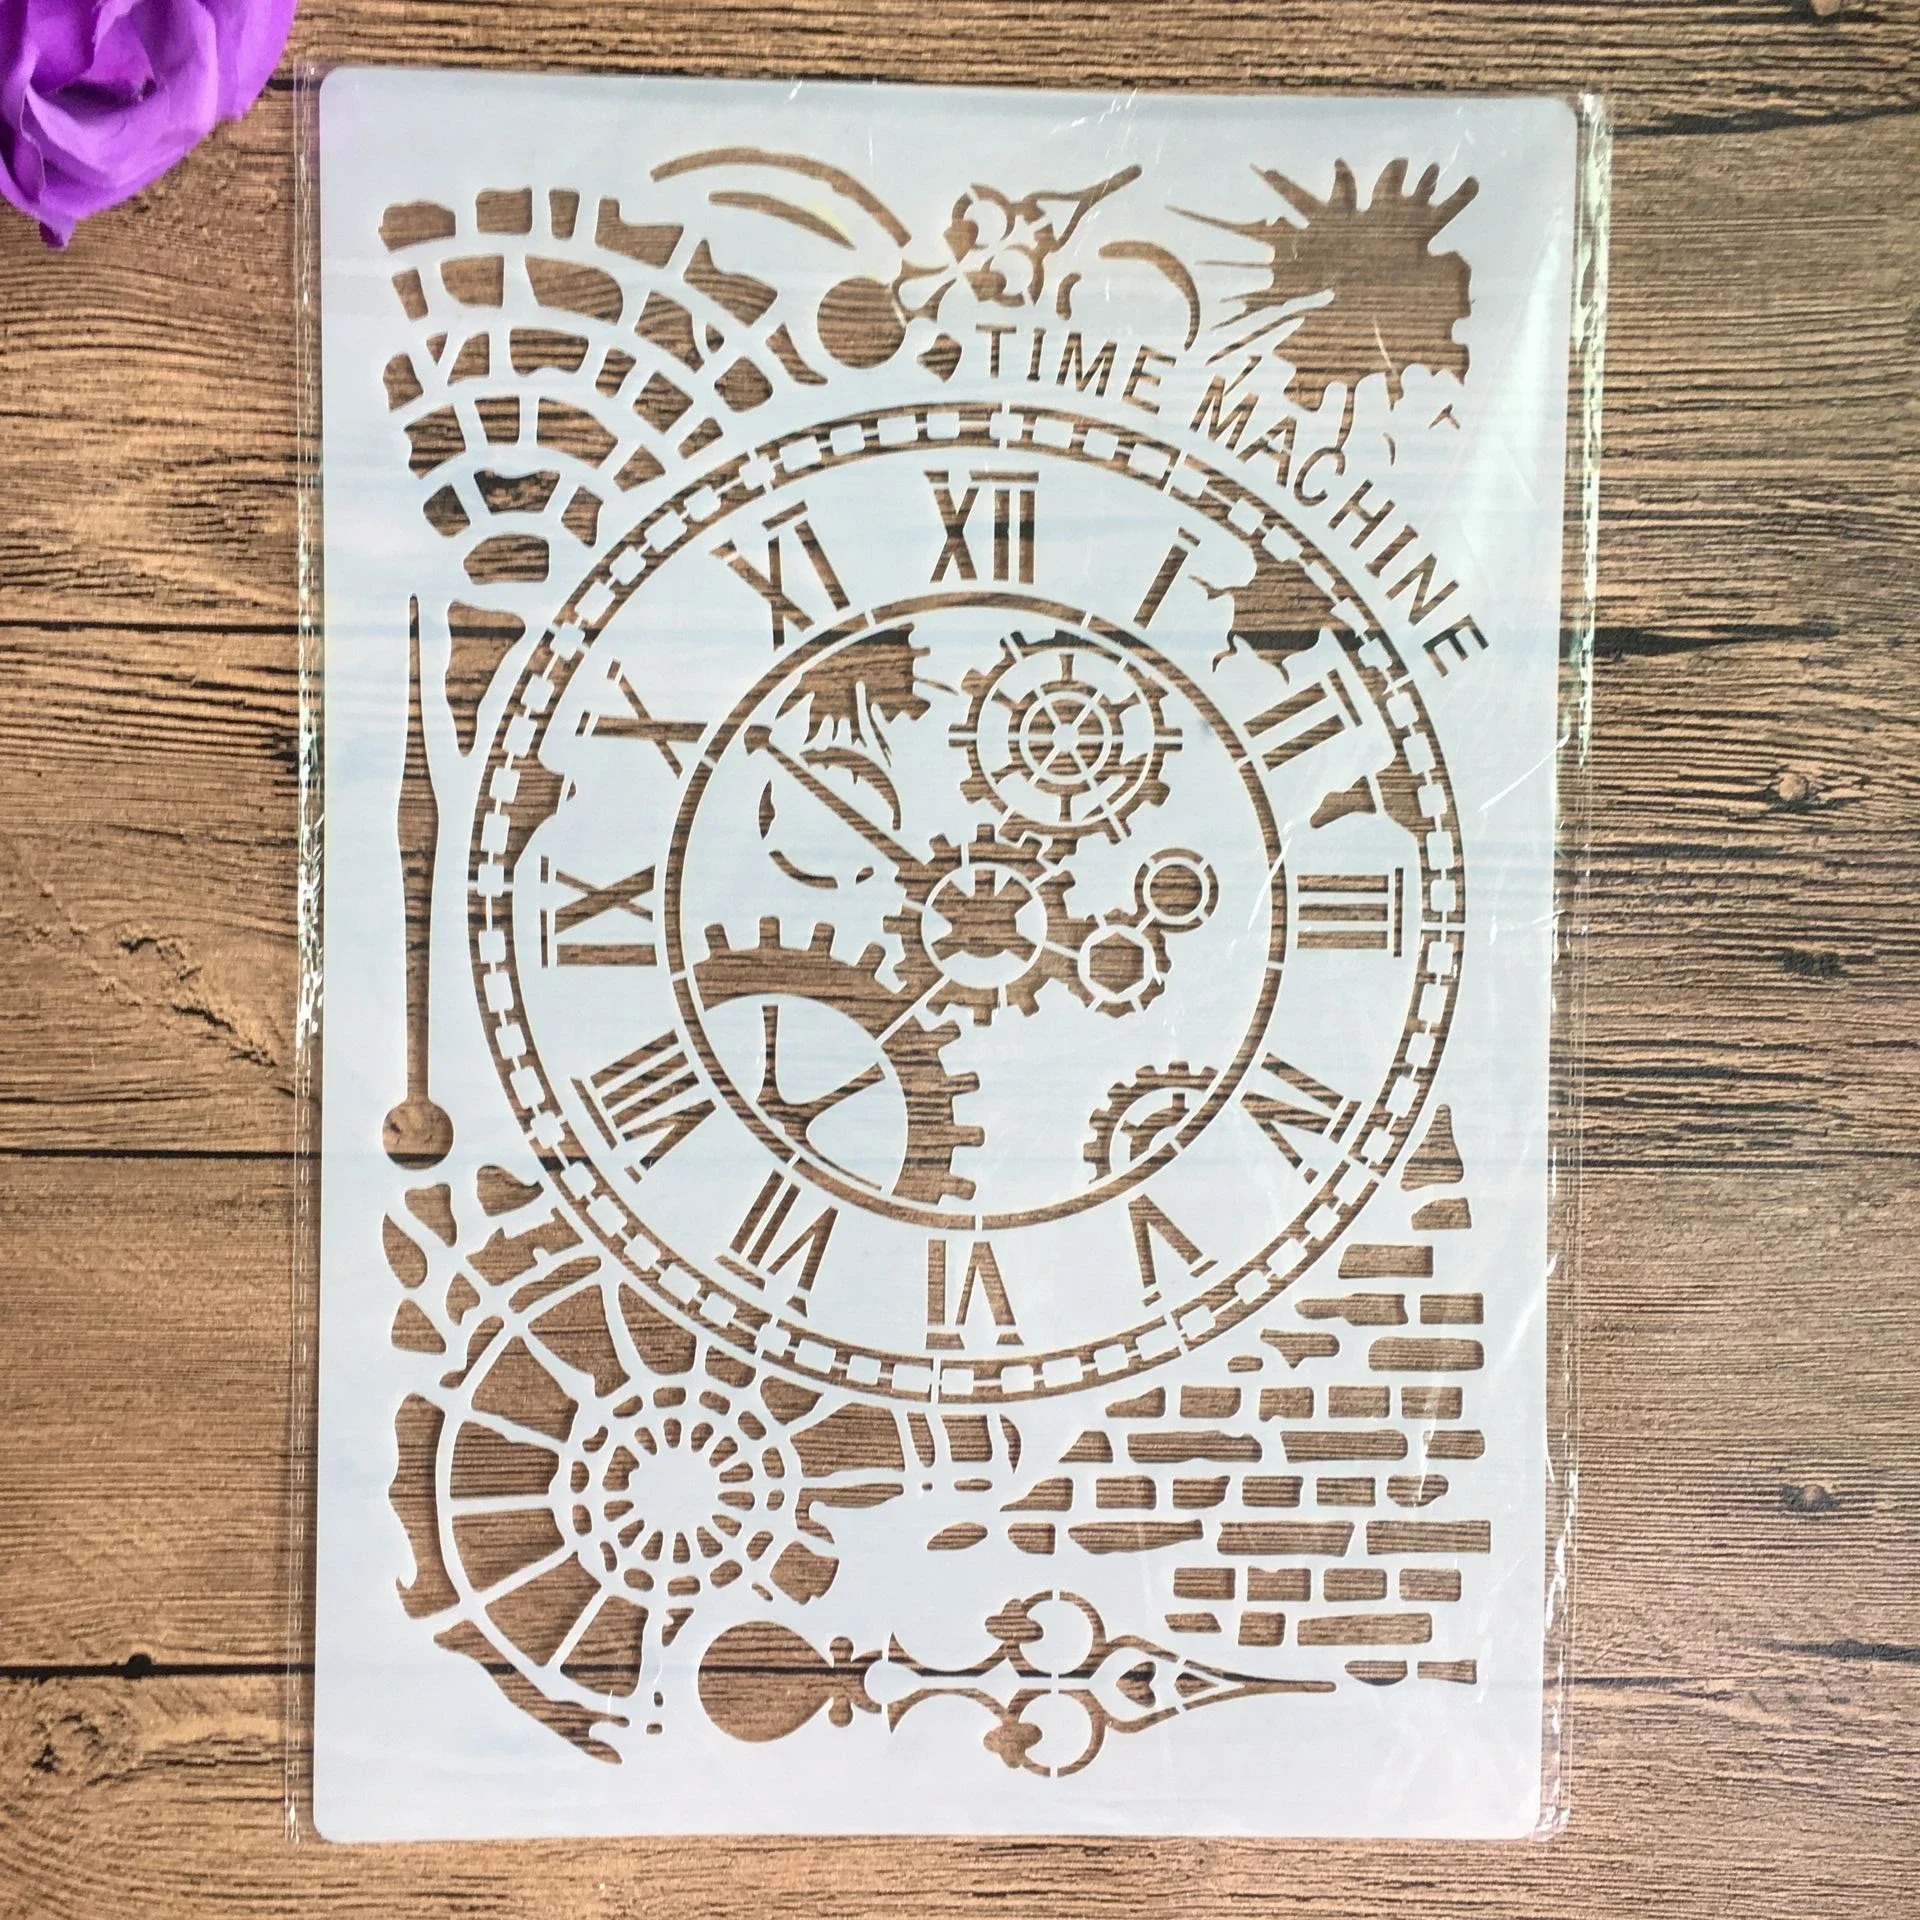 A4 size clock Flower Wall Painting Stencils Stamp Scrapbook Album Decorative Embossing Craft Paper DIY Label Stencil